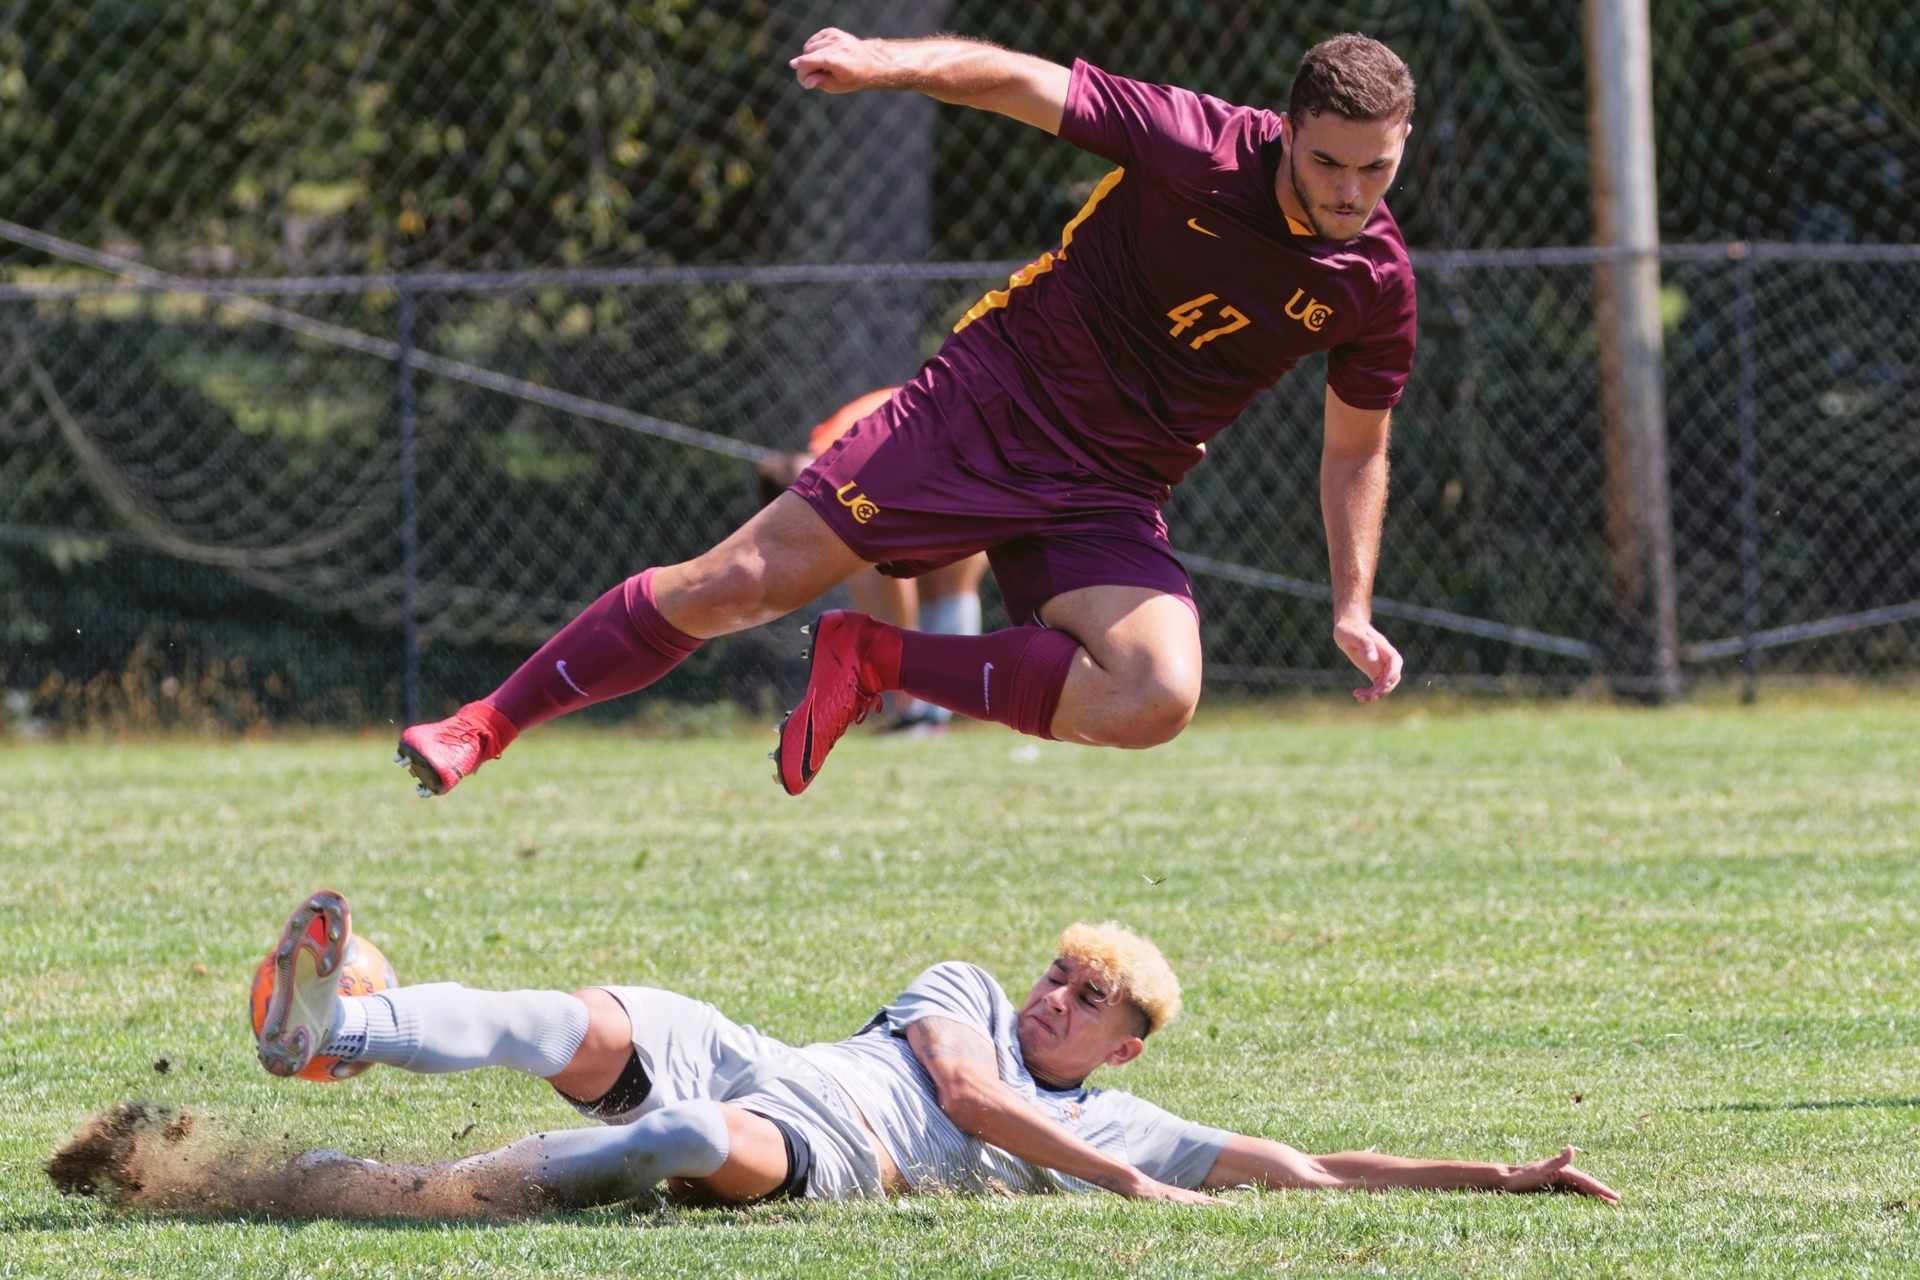 Luis Diaz wins the ball with a slide tackle during Sunday's skirmish with Charleston. (Brian Bergstrom/My Buckhannon)